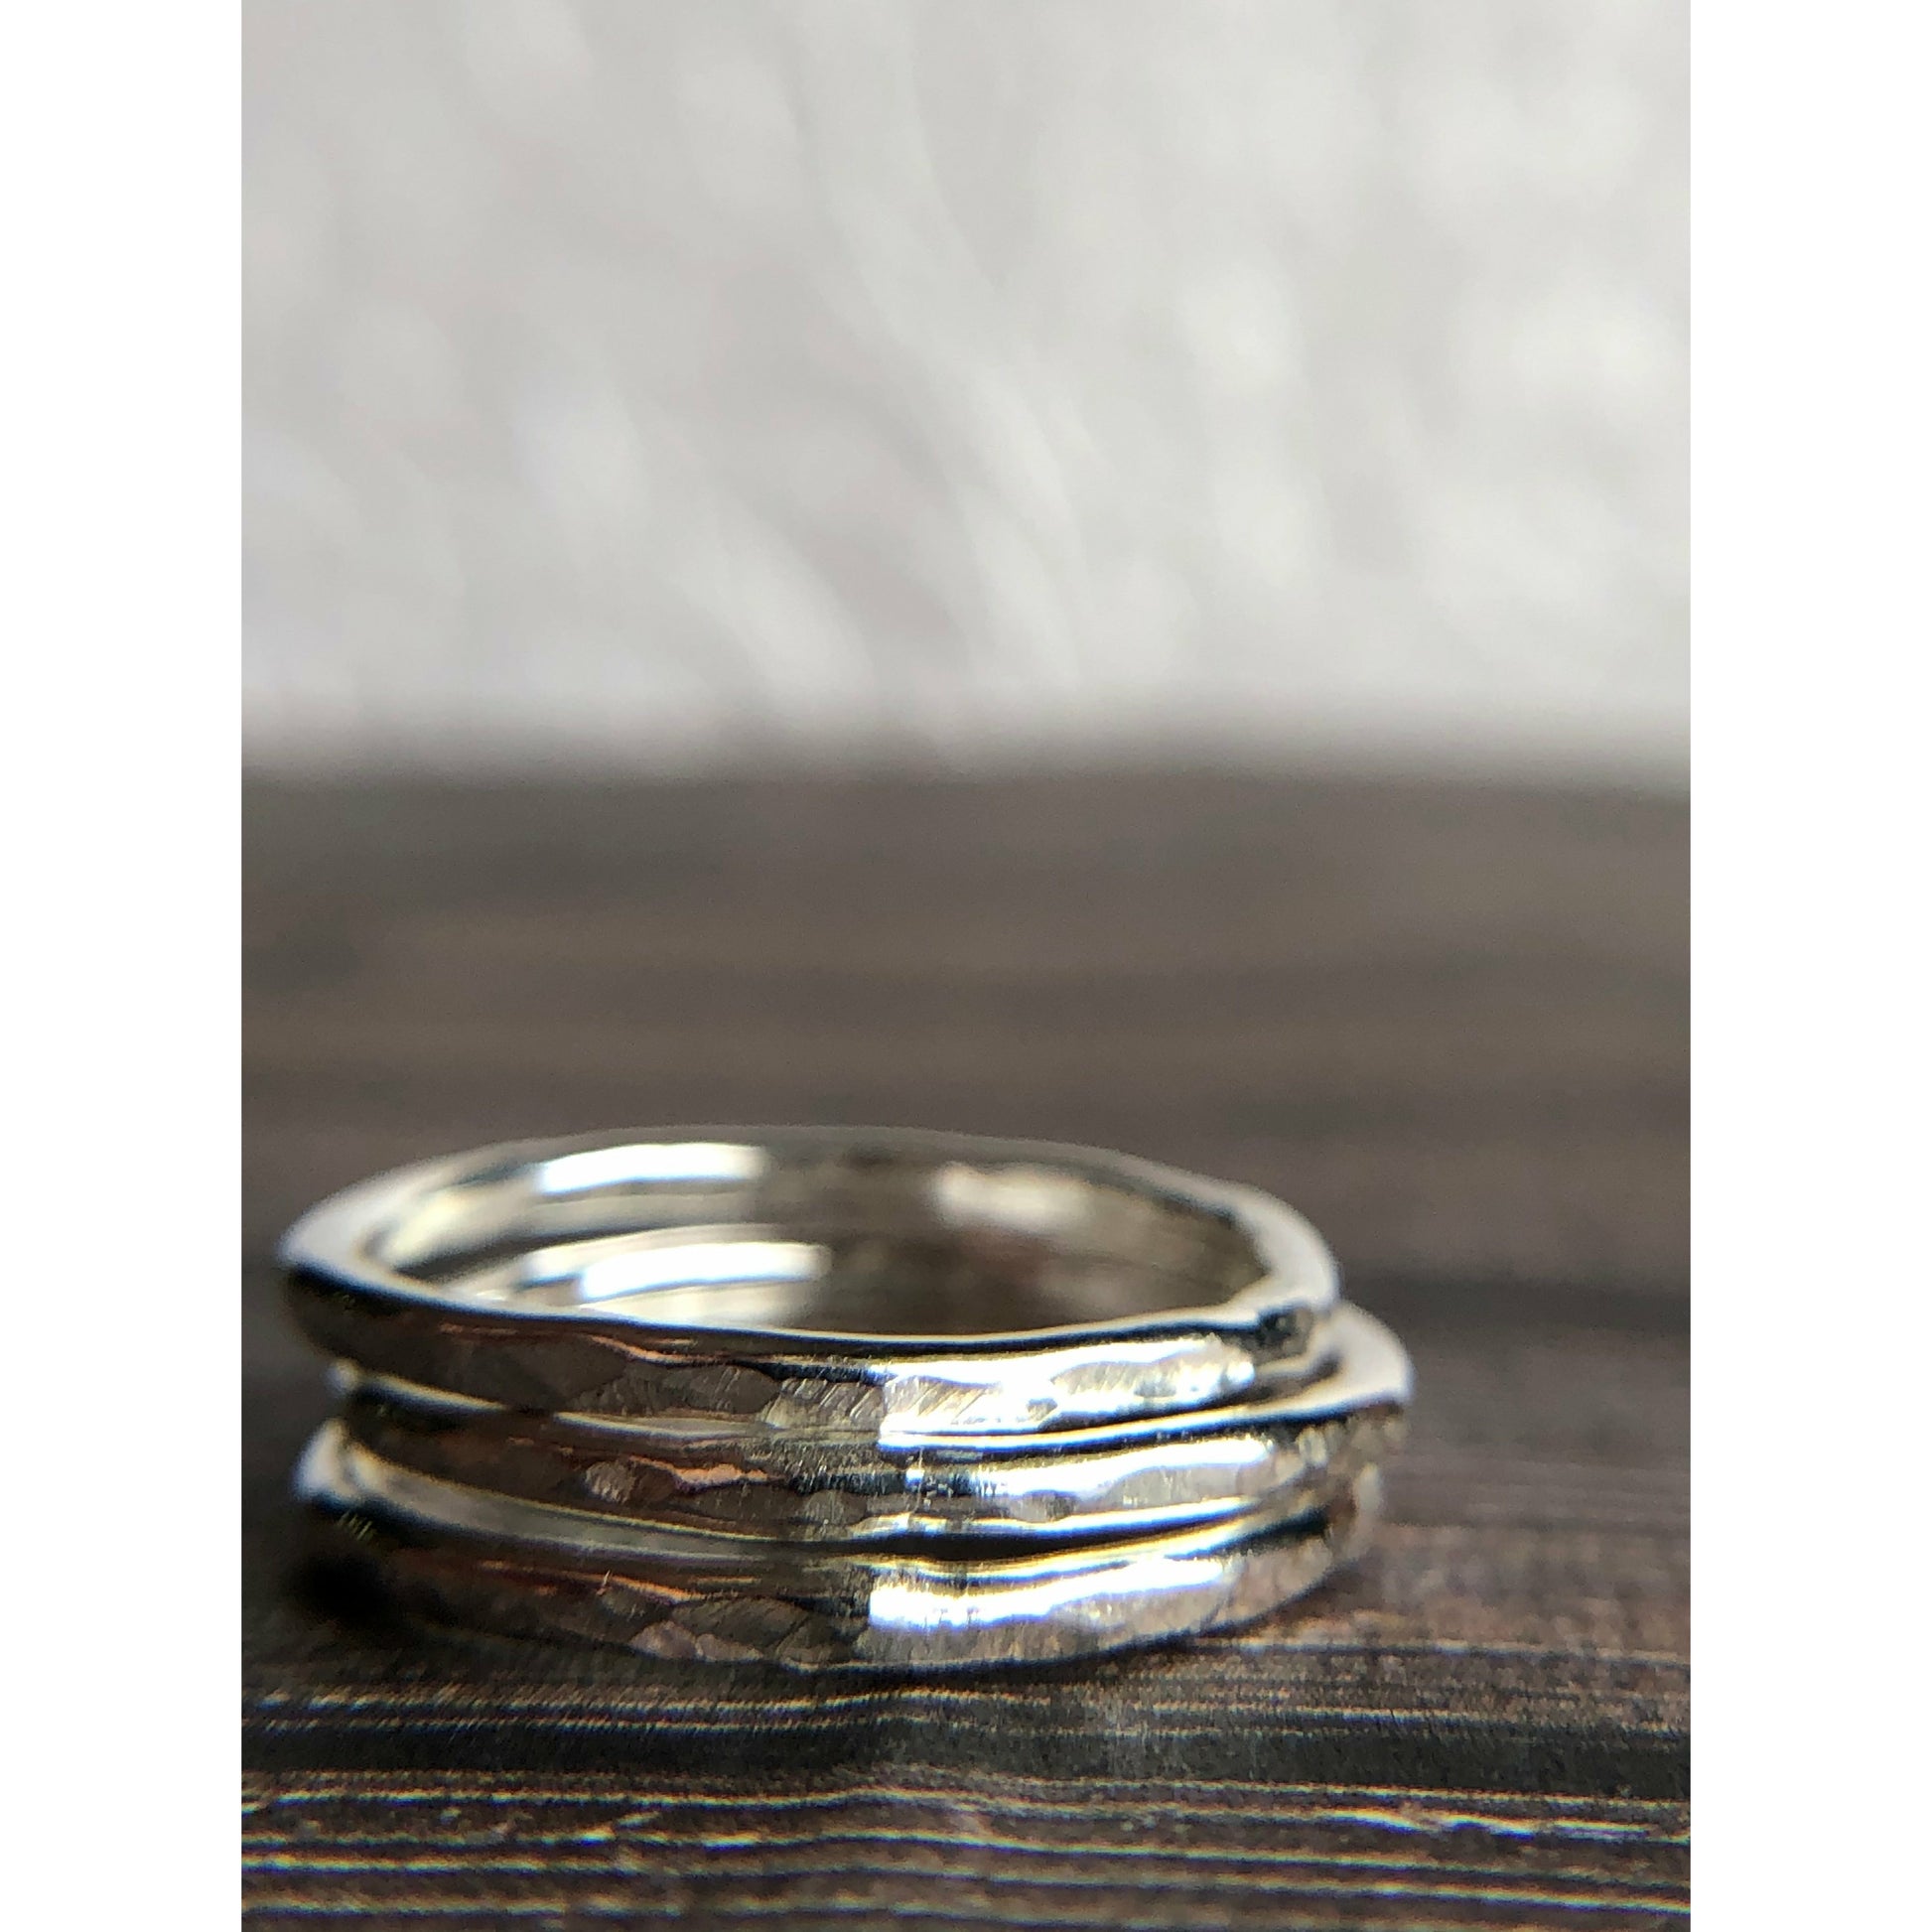 sterling-silver-rings-stackable-rings-hammered-bands-triple-band-ring-set-simple-band-thin-stack-silver-rings-gifts-for-her-graduation